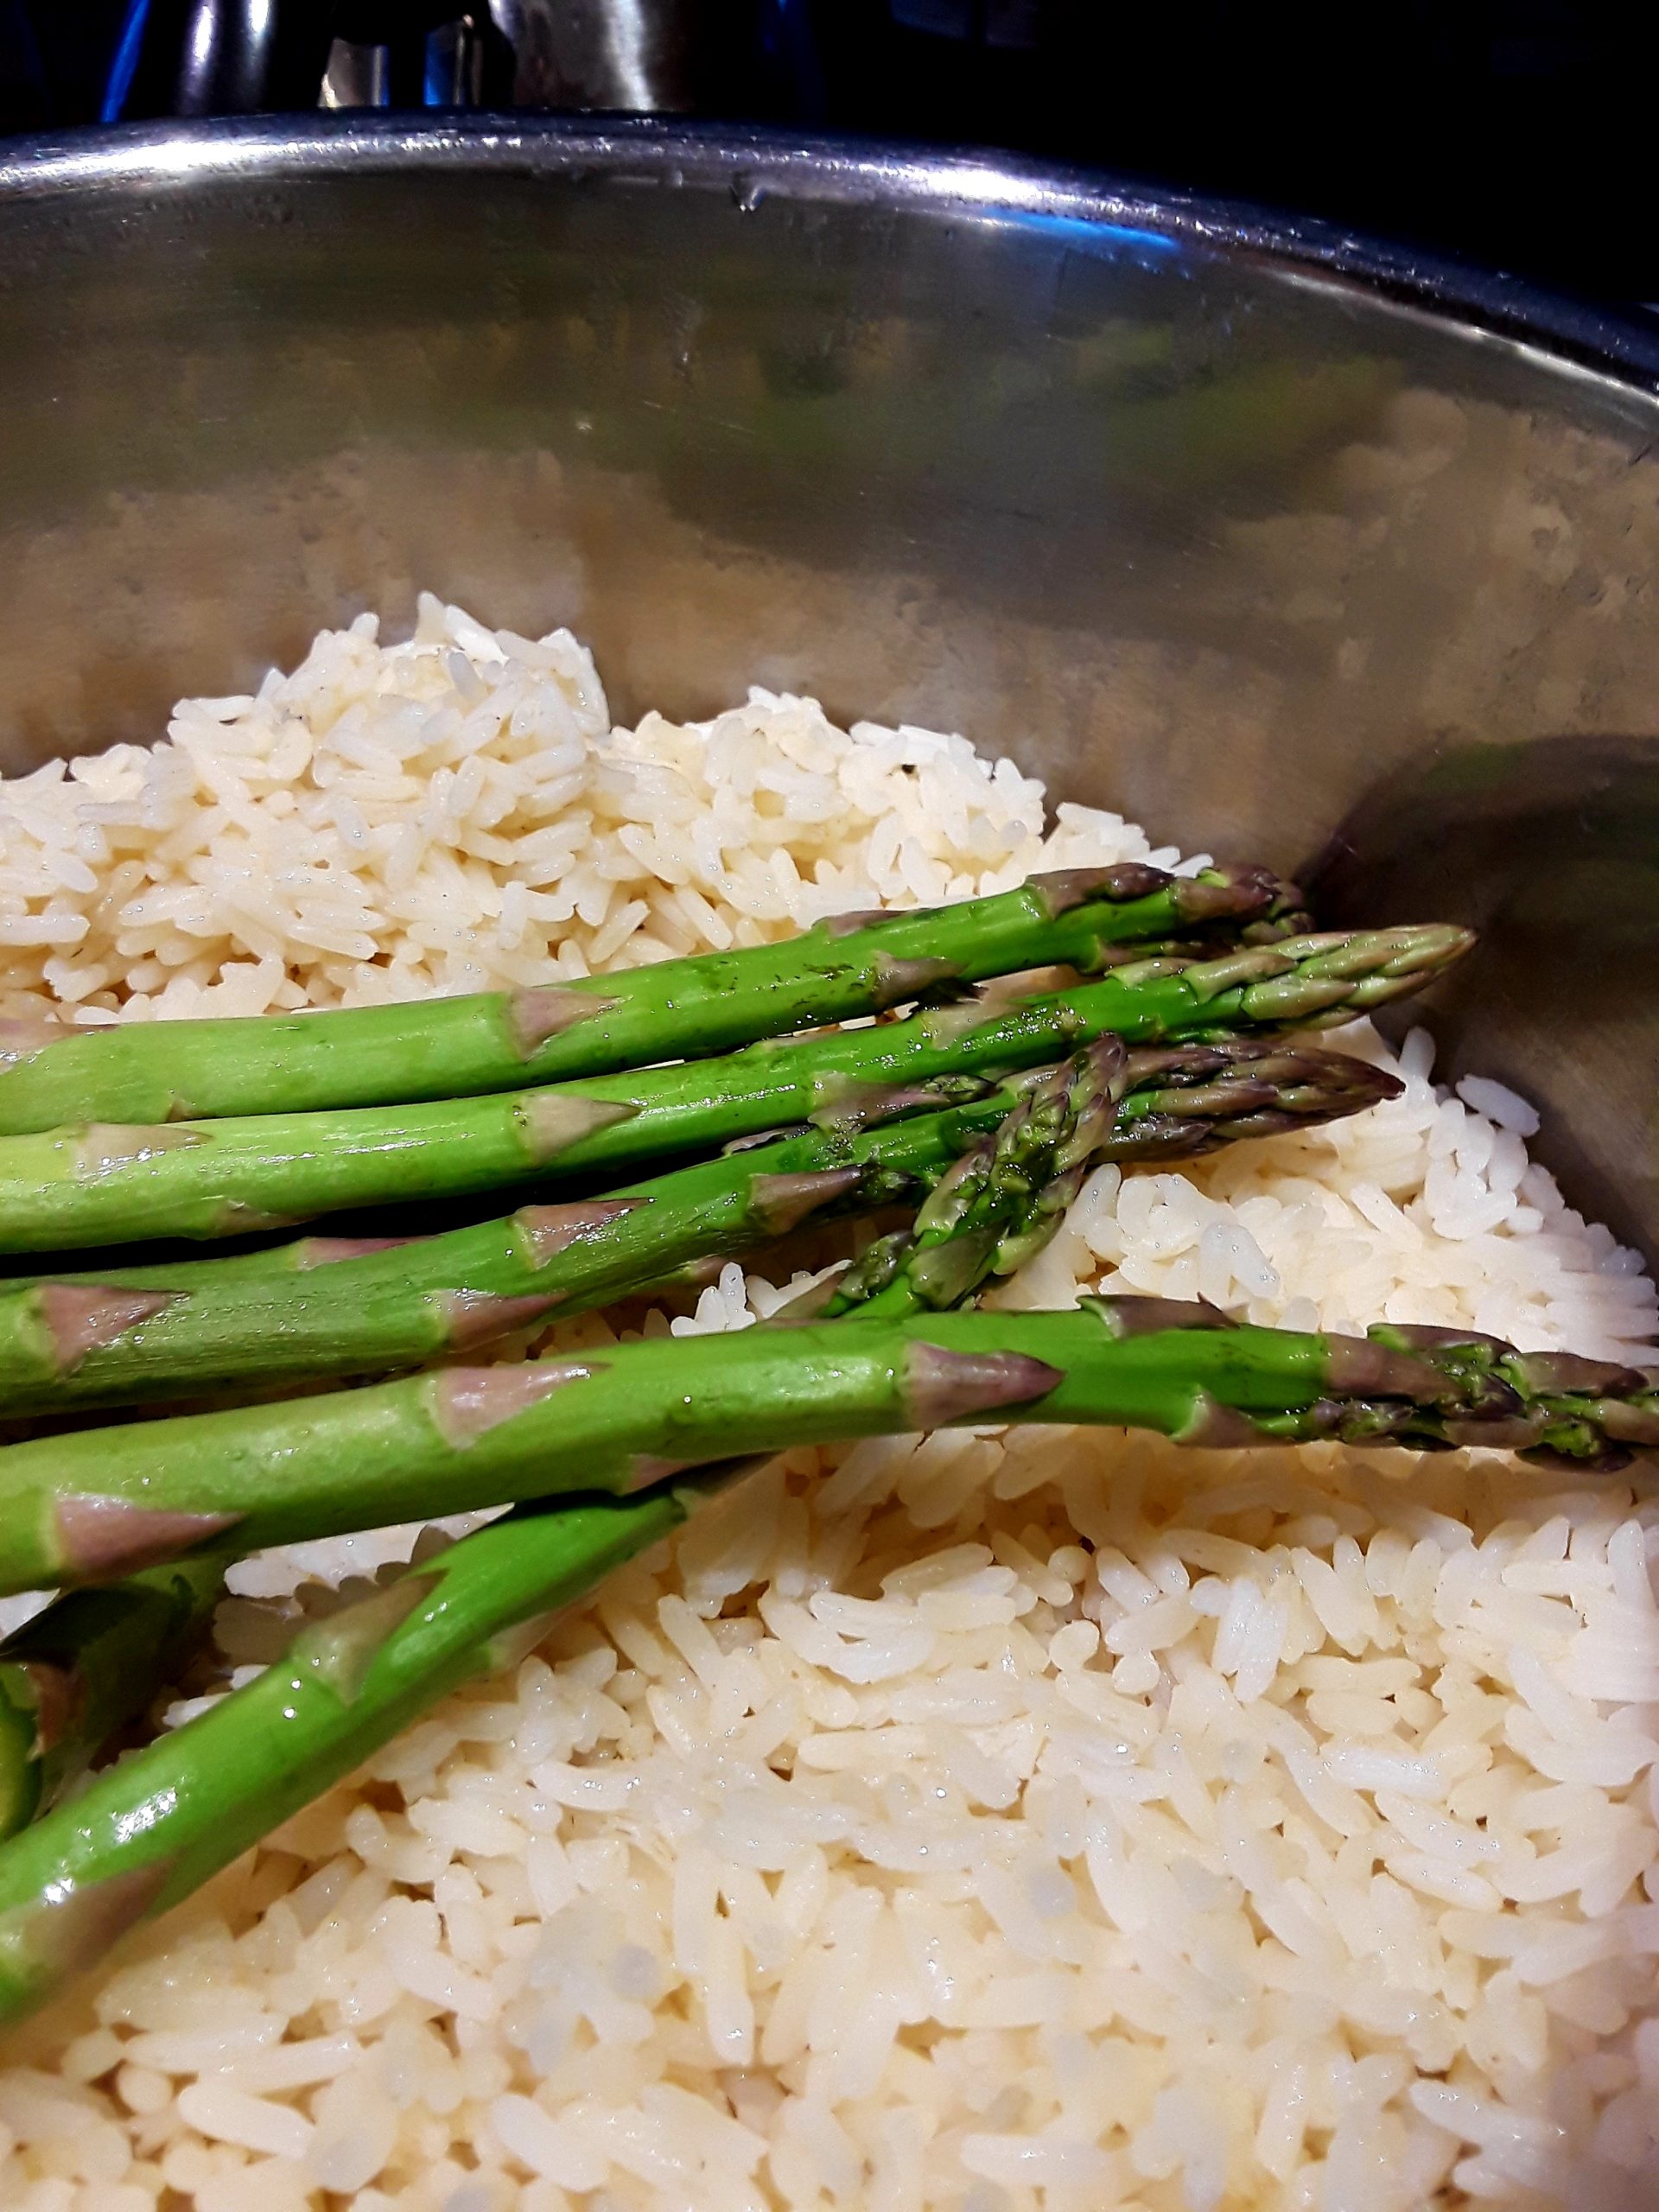 asparagus spears are spread out on top of cooked rice in the rice pot